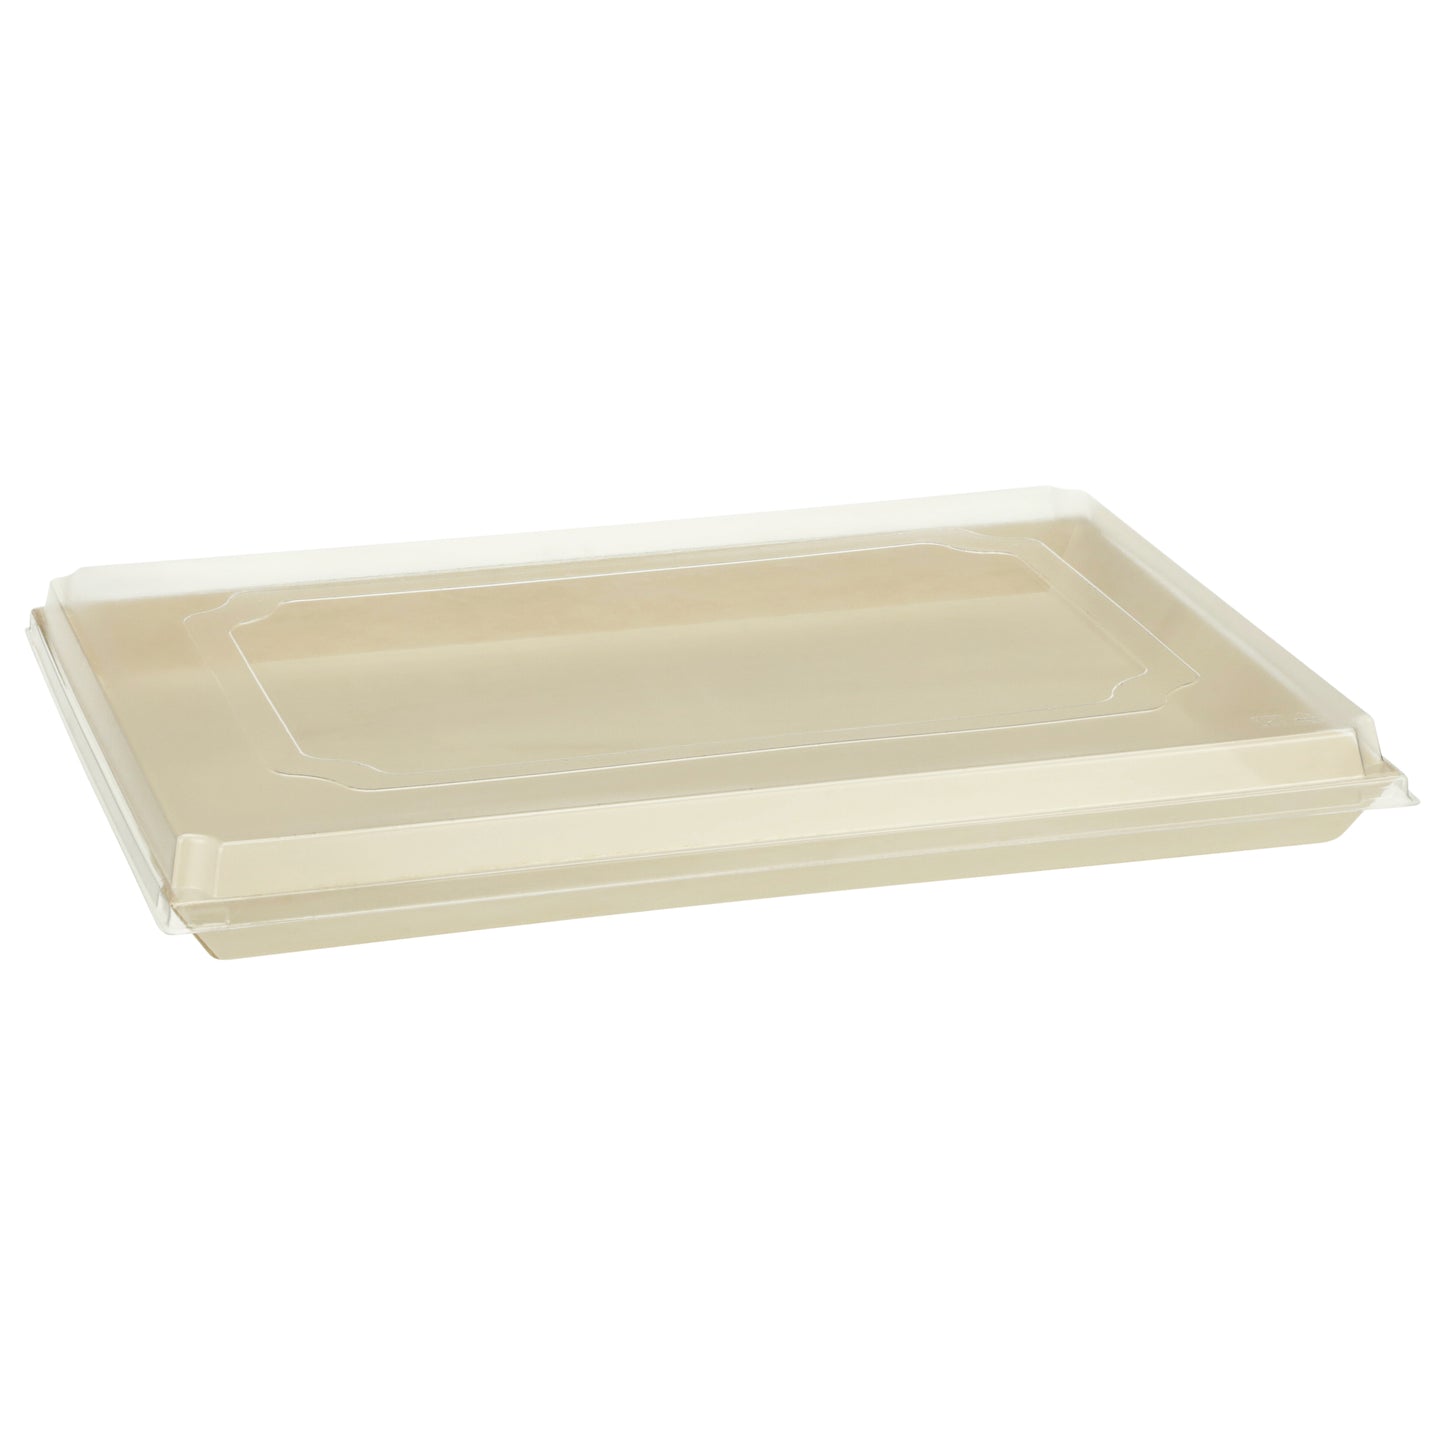 11.8" X 15" X 1" Covered Tray Set | Compostable Balsa Tray with RPET Lid